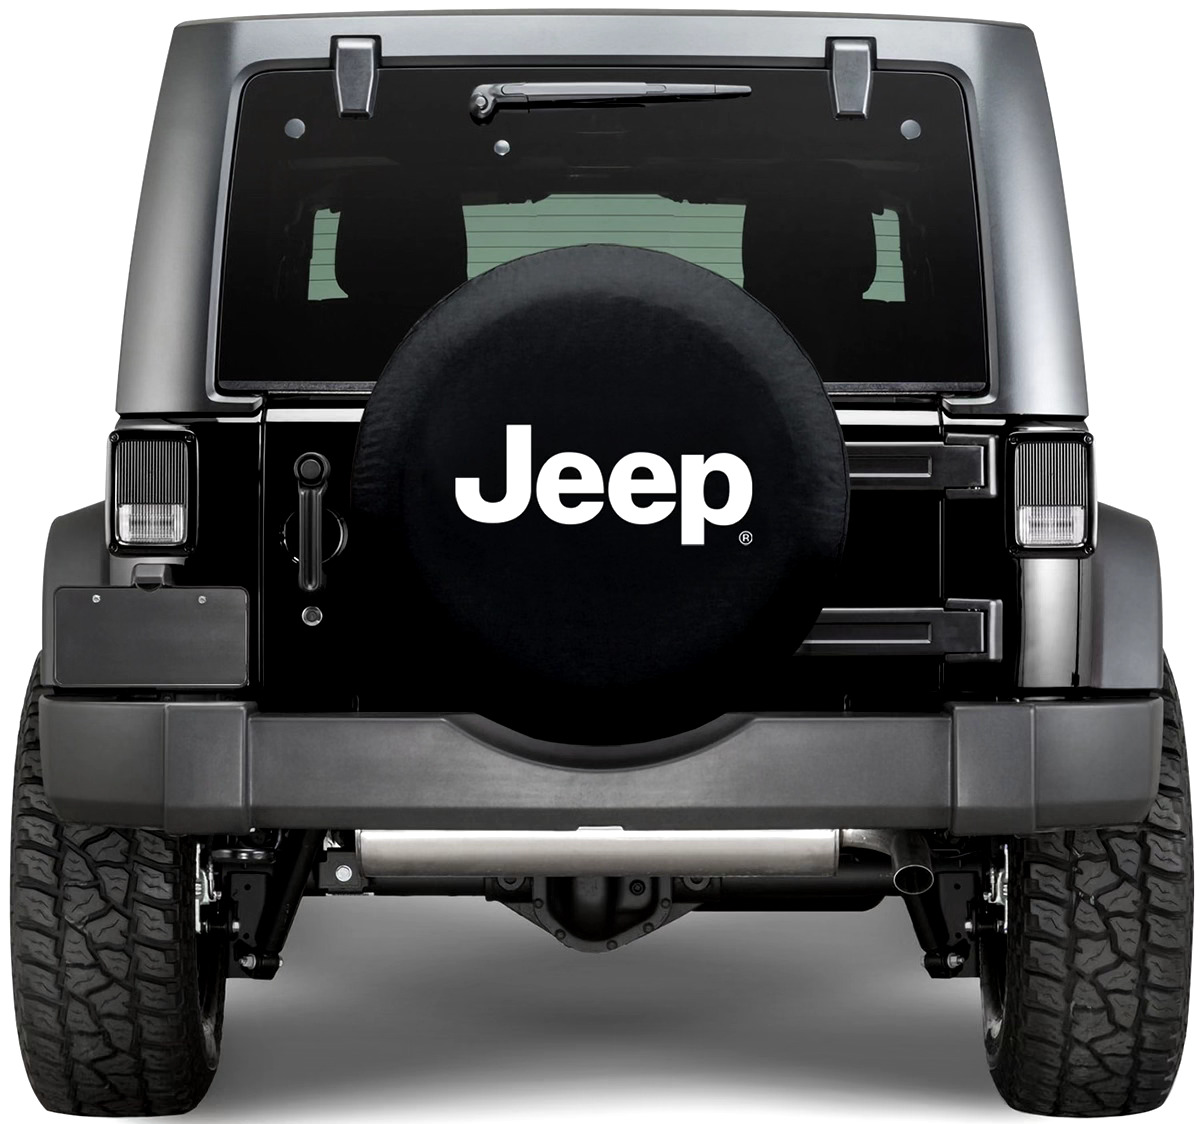 ⭐️⭐️⭐️⭐️⭐️ NEW Jeep Rear SPARE TIRE COVER fits 30" to 33"  Spare Tires BEST GIFT